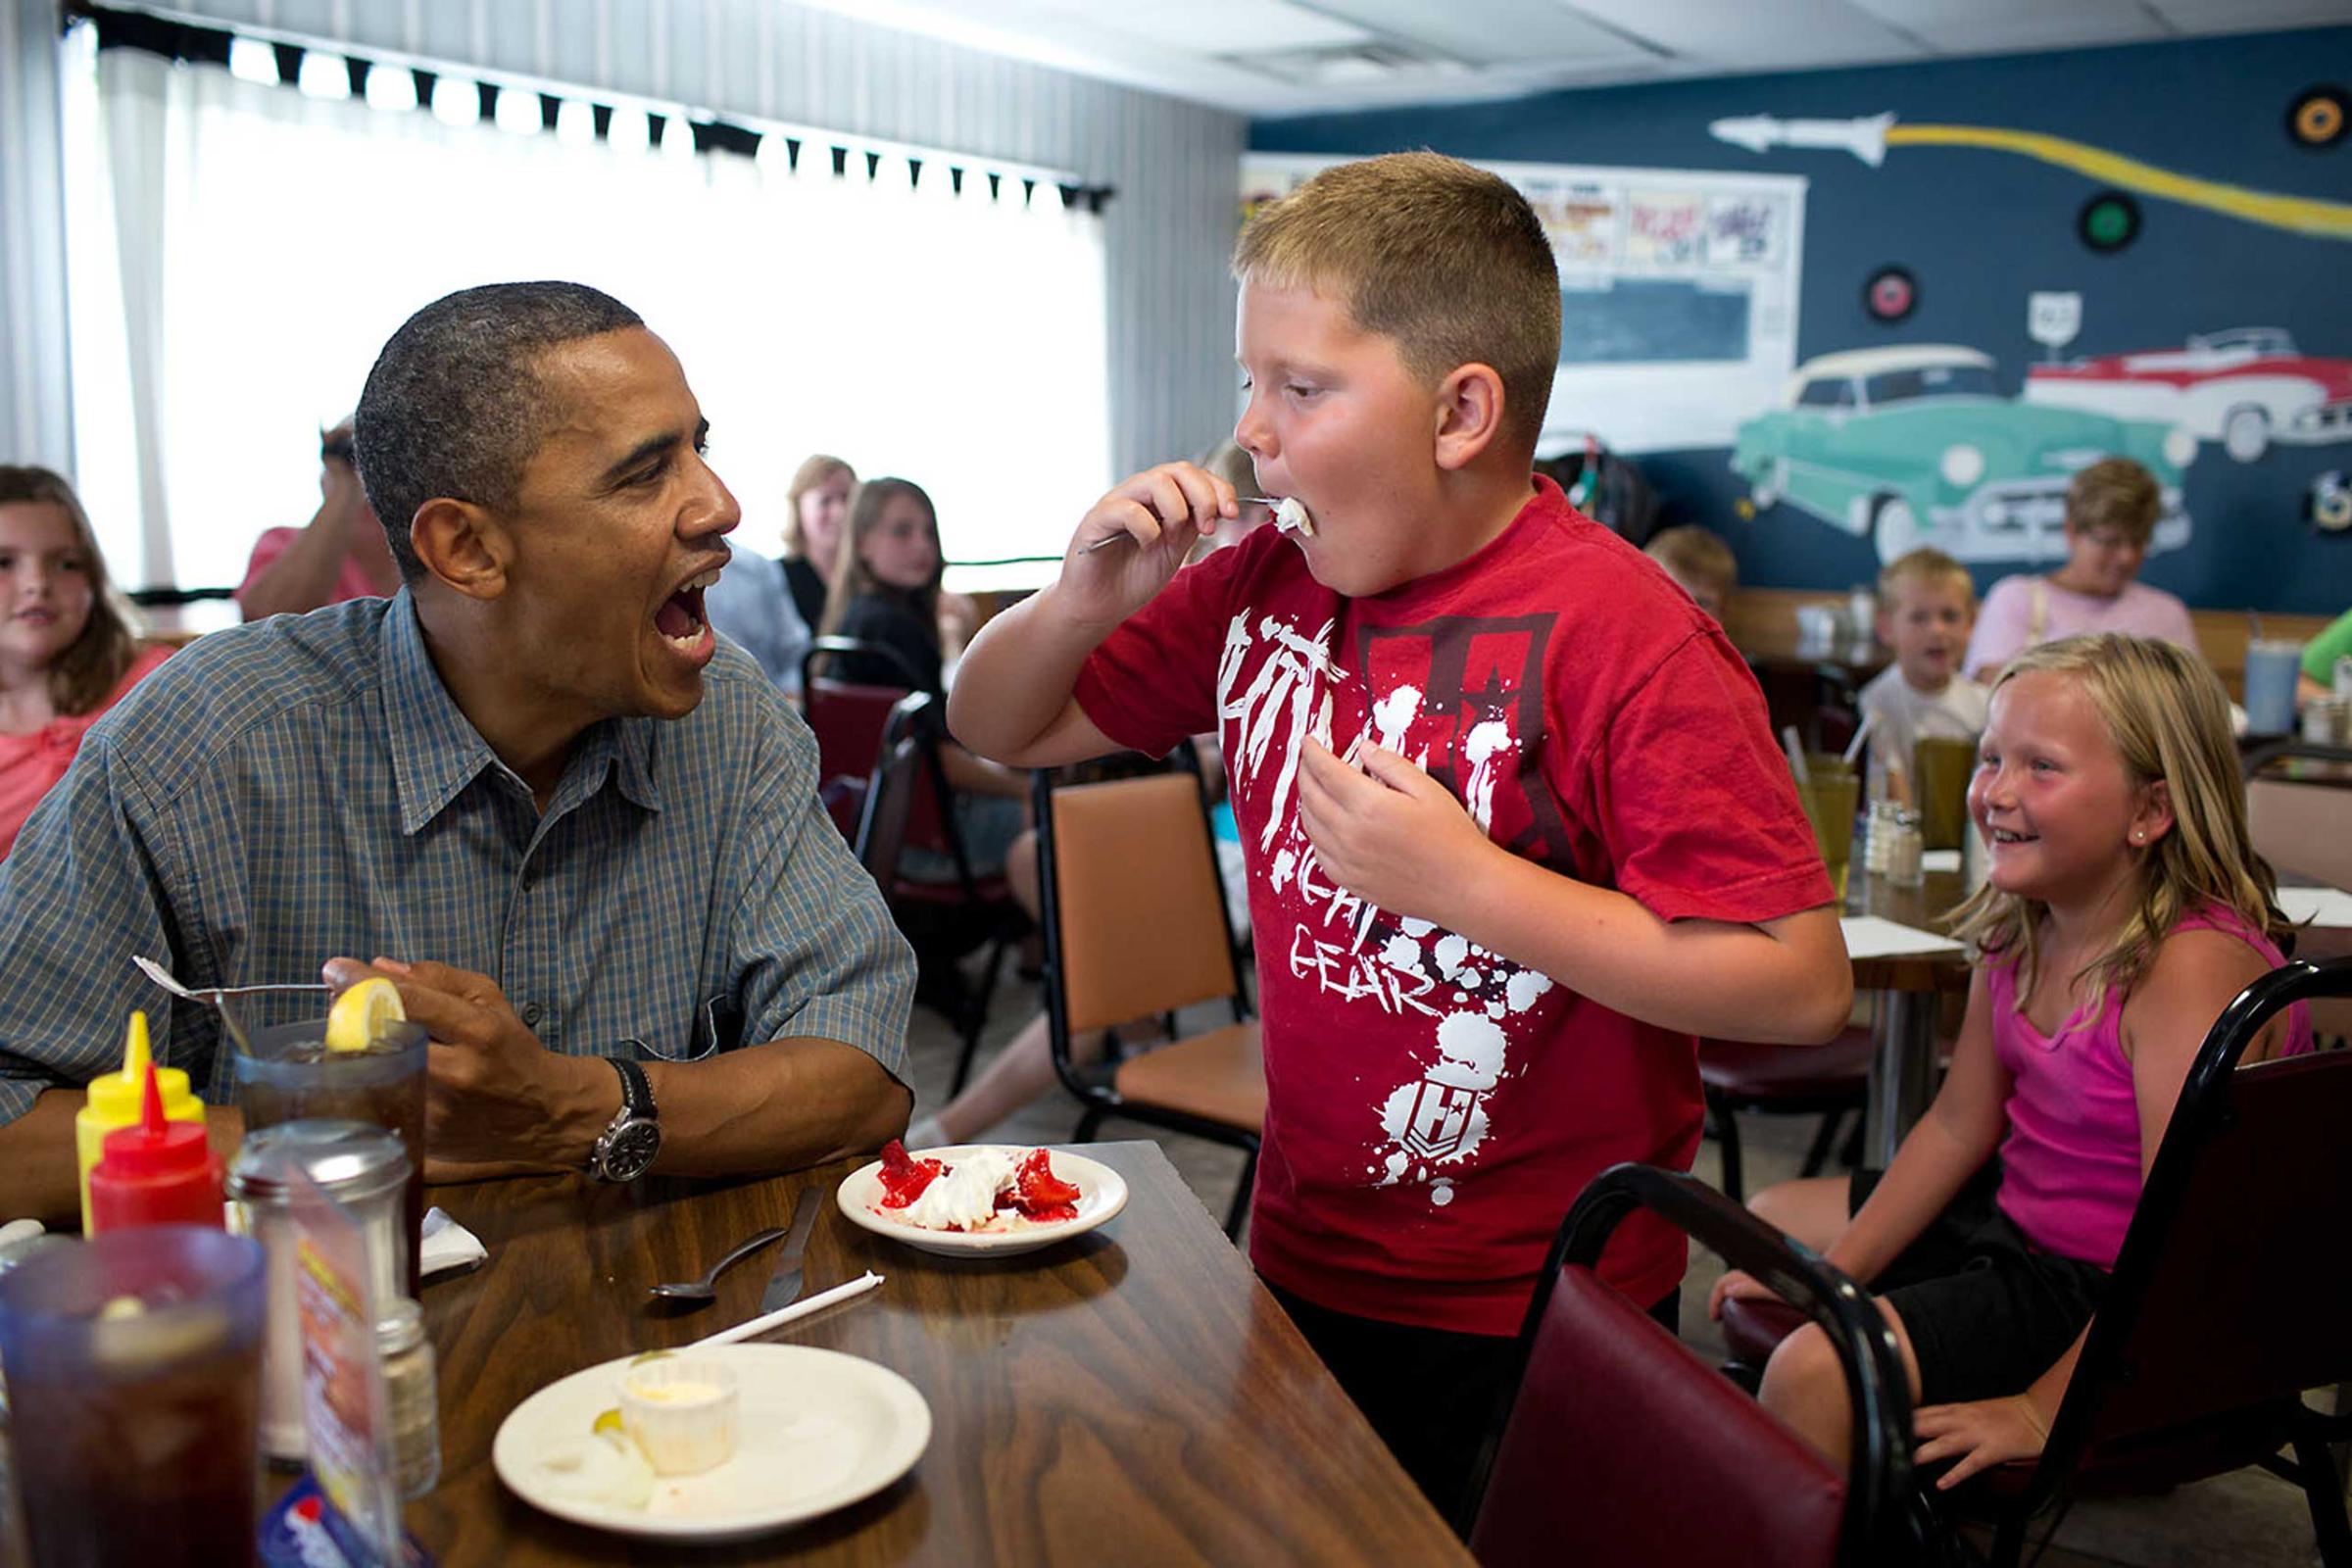 President Obama shares a piece of strawberry pie with a young patron at Kozy Corners, a local diner in Oak Harbor, Ohio, July 5, 2012.